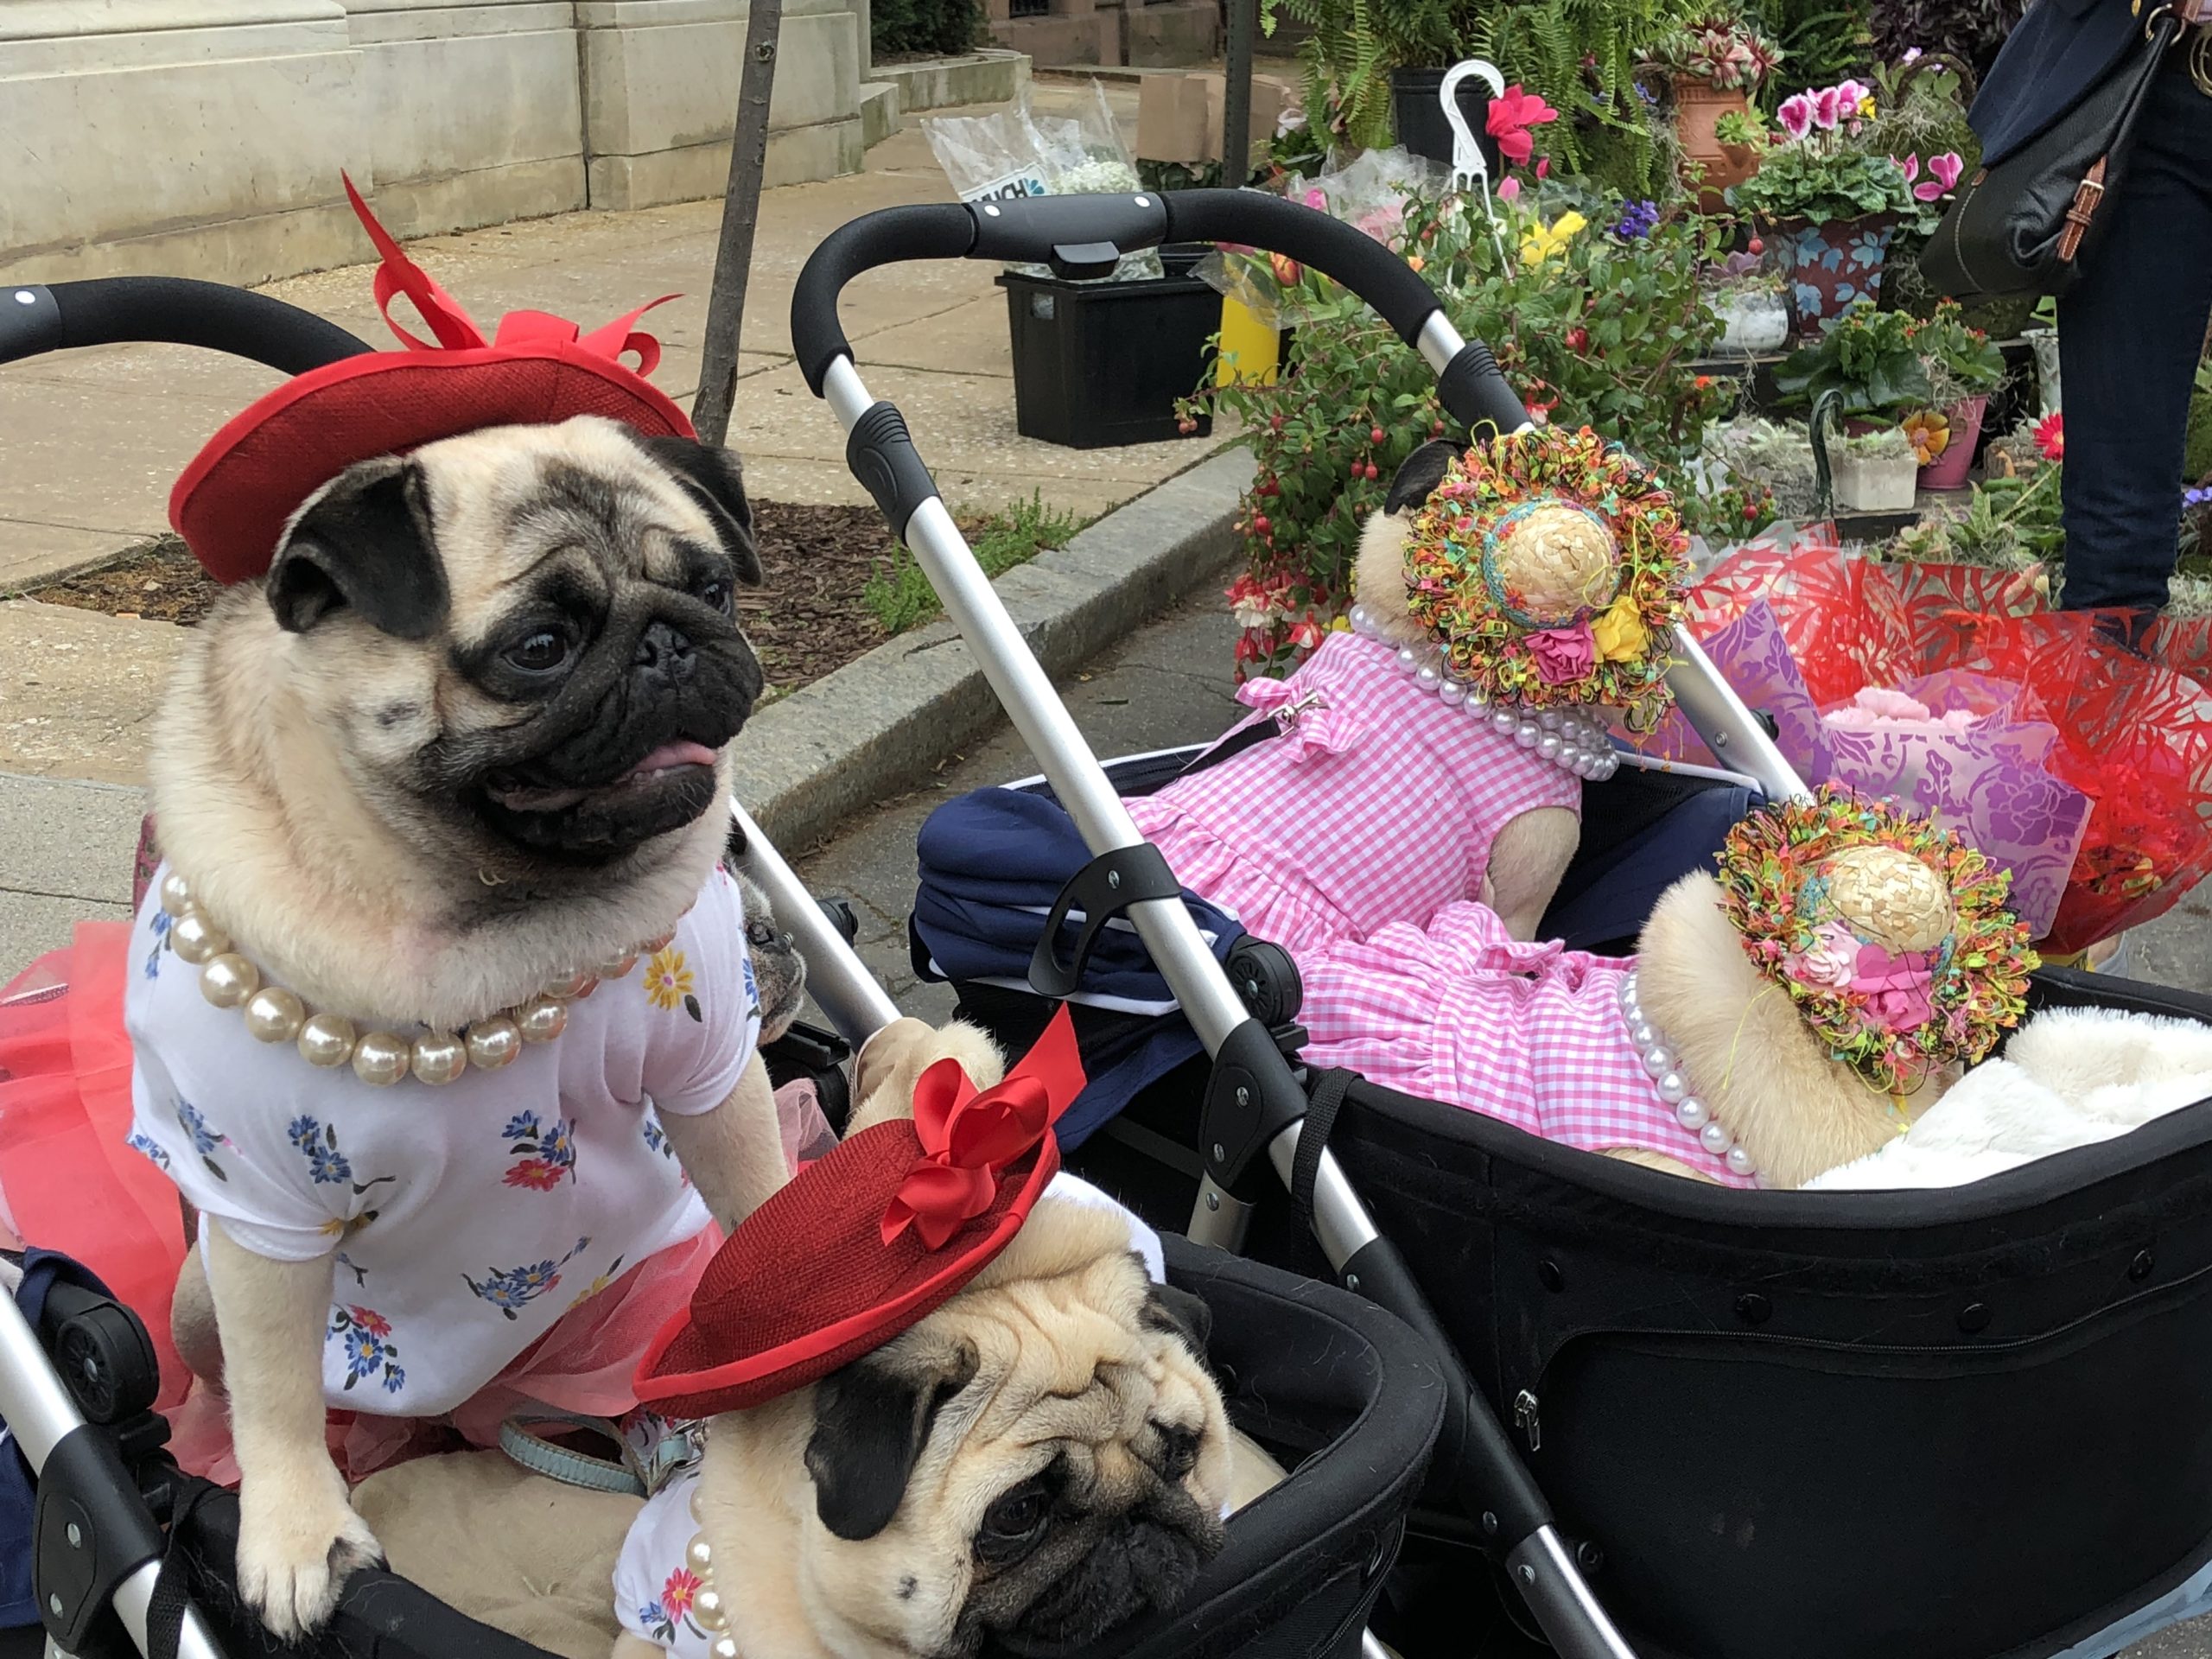 A fancy pug dressed in a hat and blouse enjoys its day at the annual Flower Mart